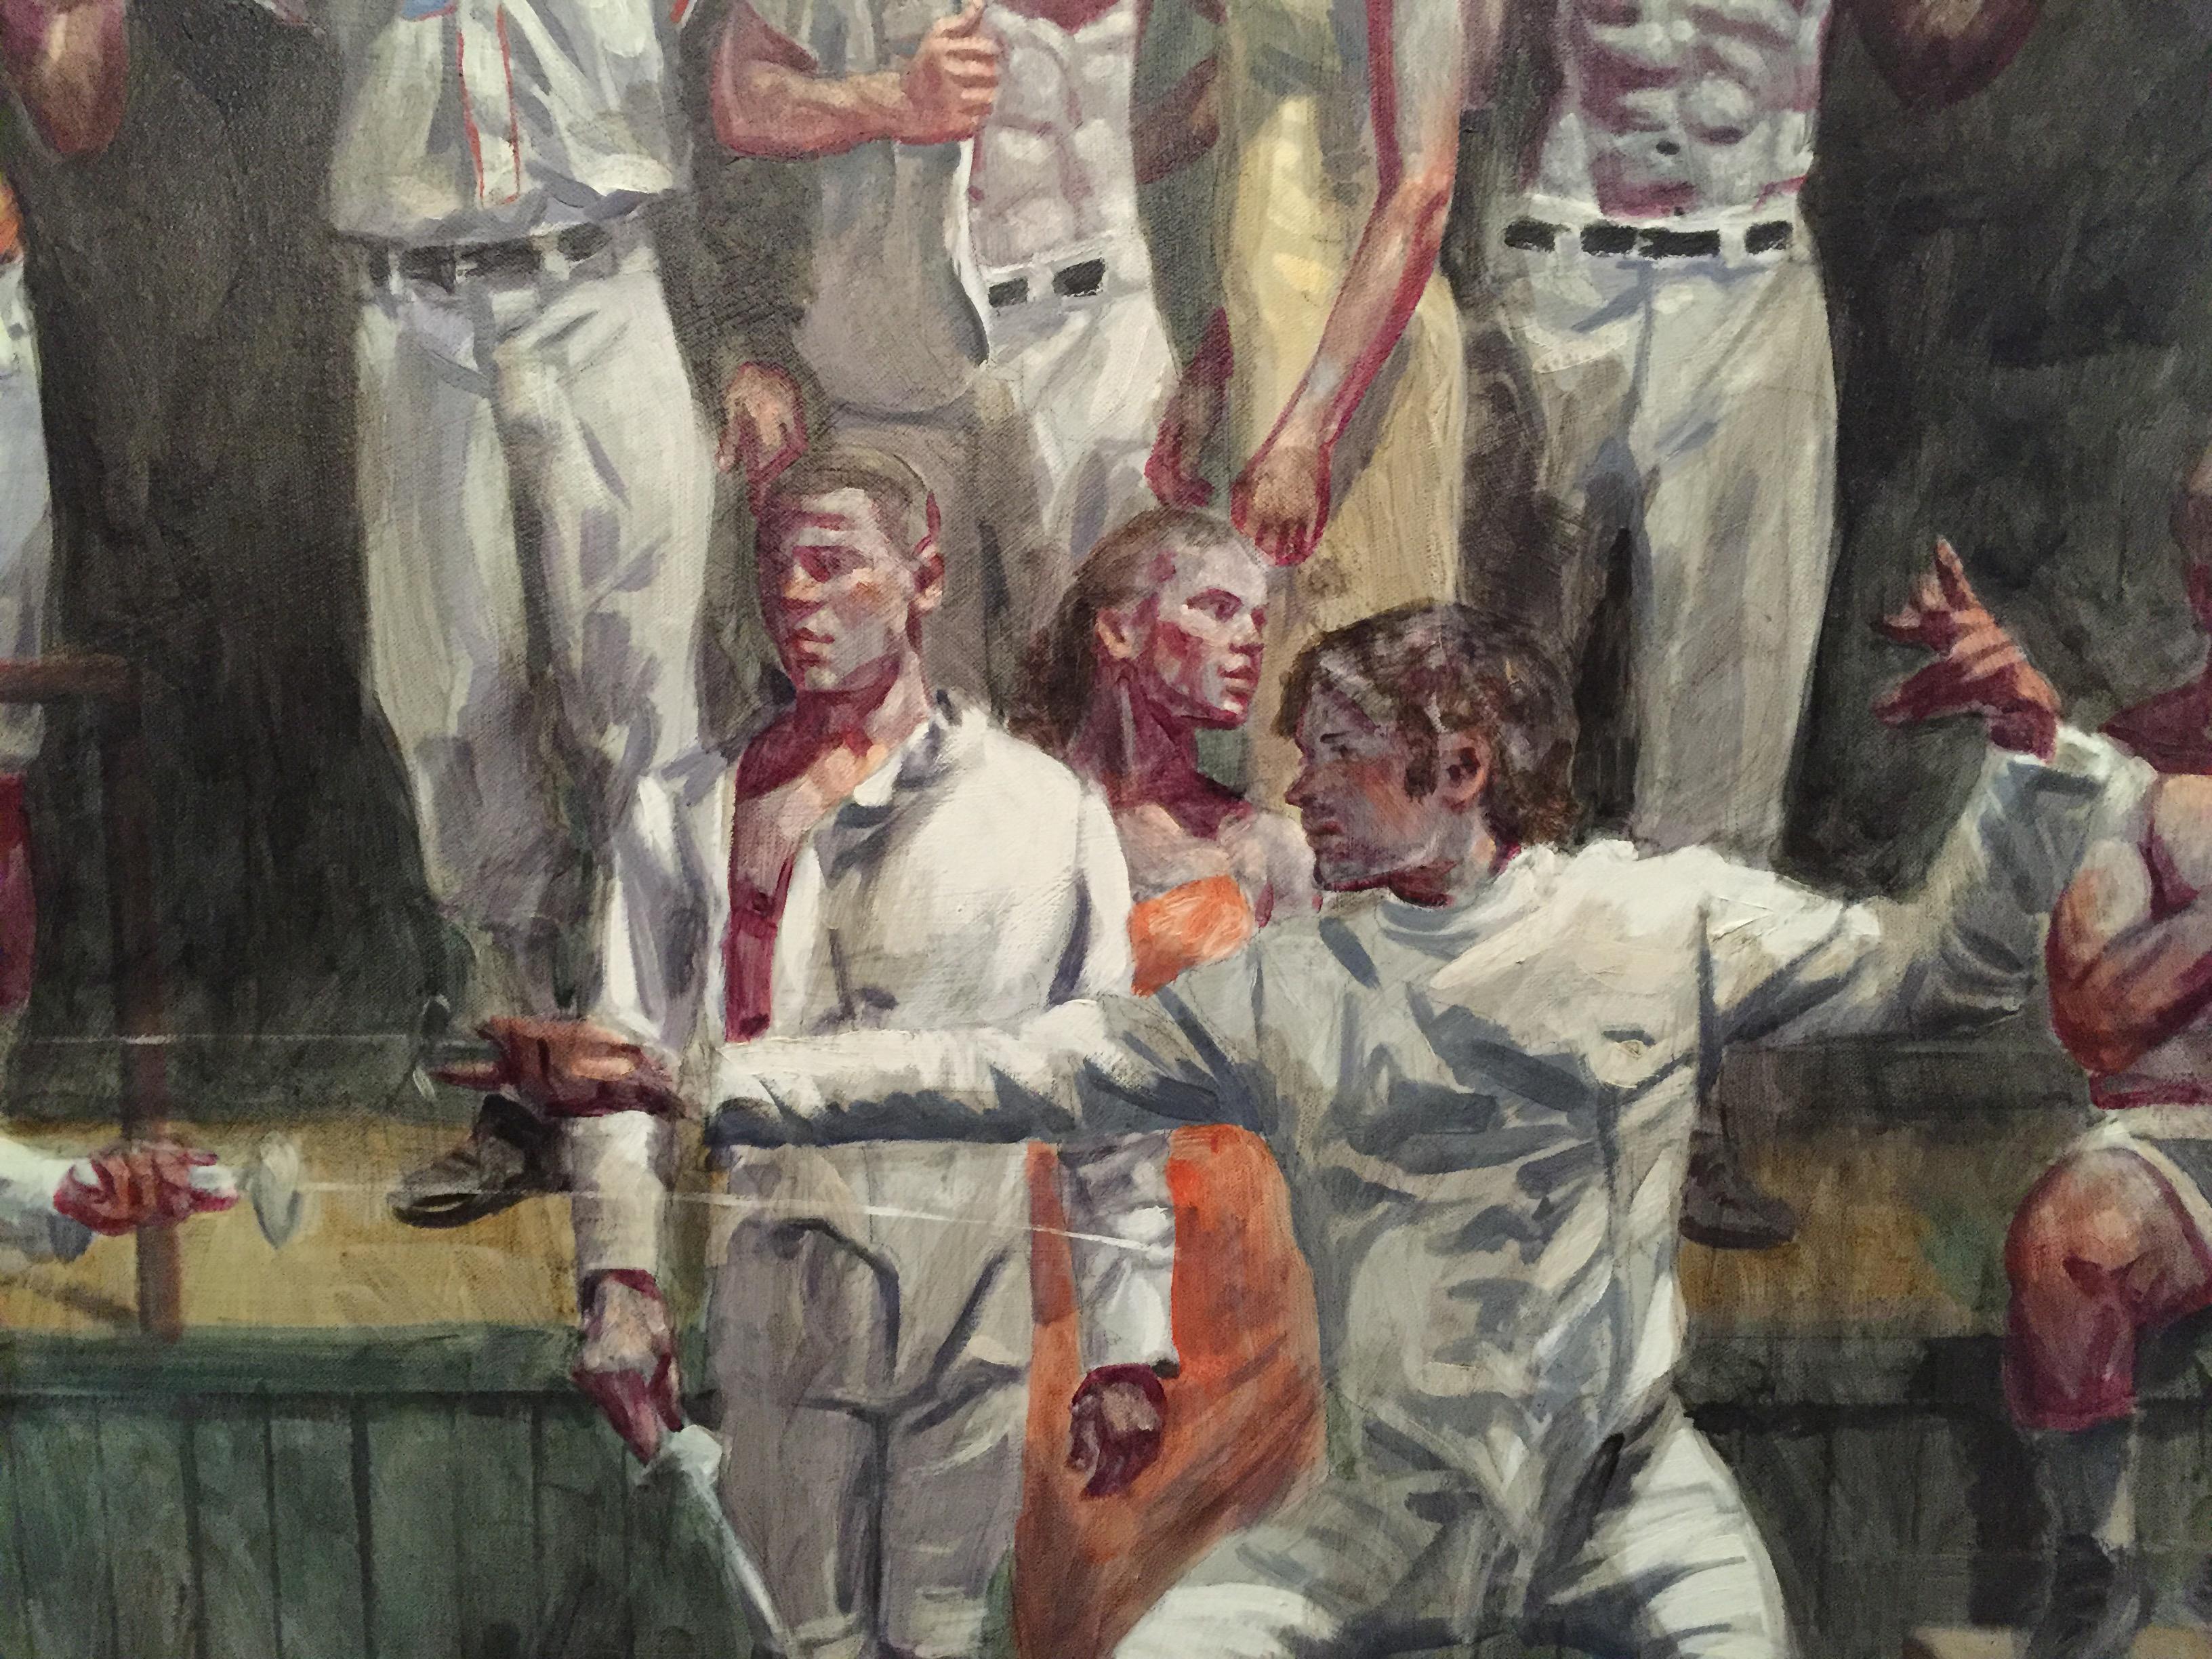 Fencers (Figurative Oil Painting by Mark Beard of Athletes in Sport, Framed) 1